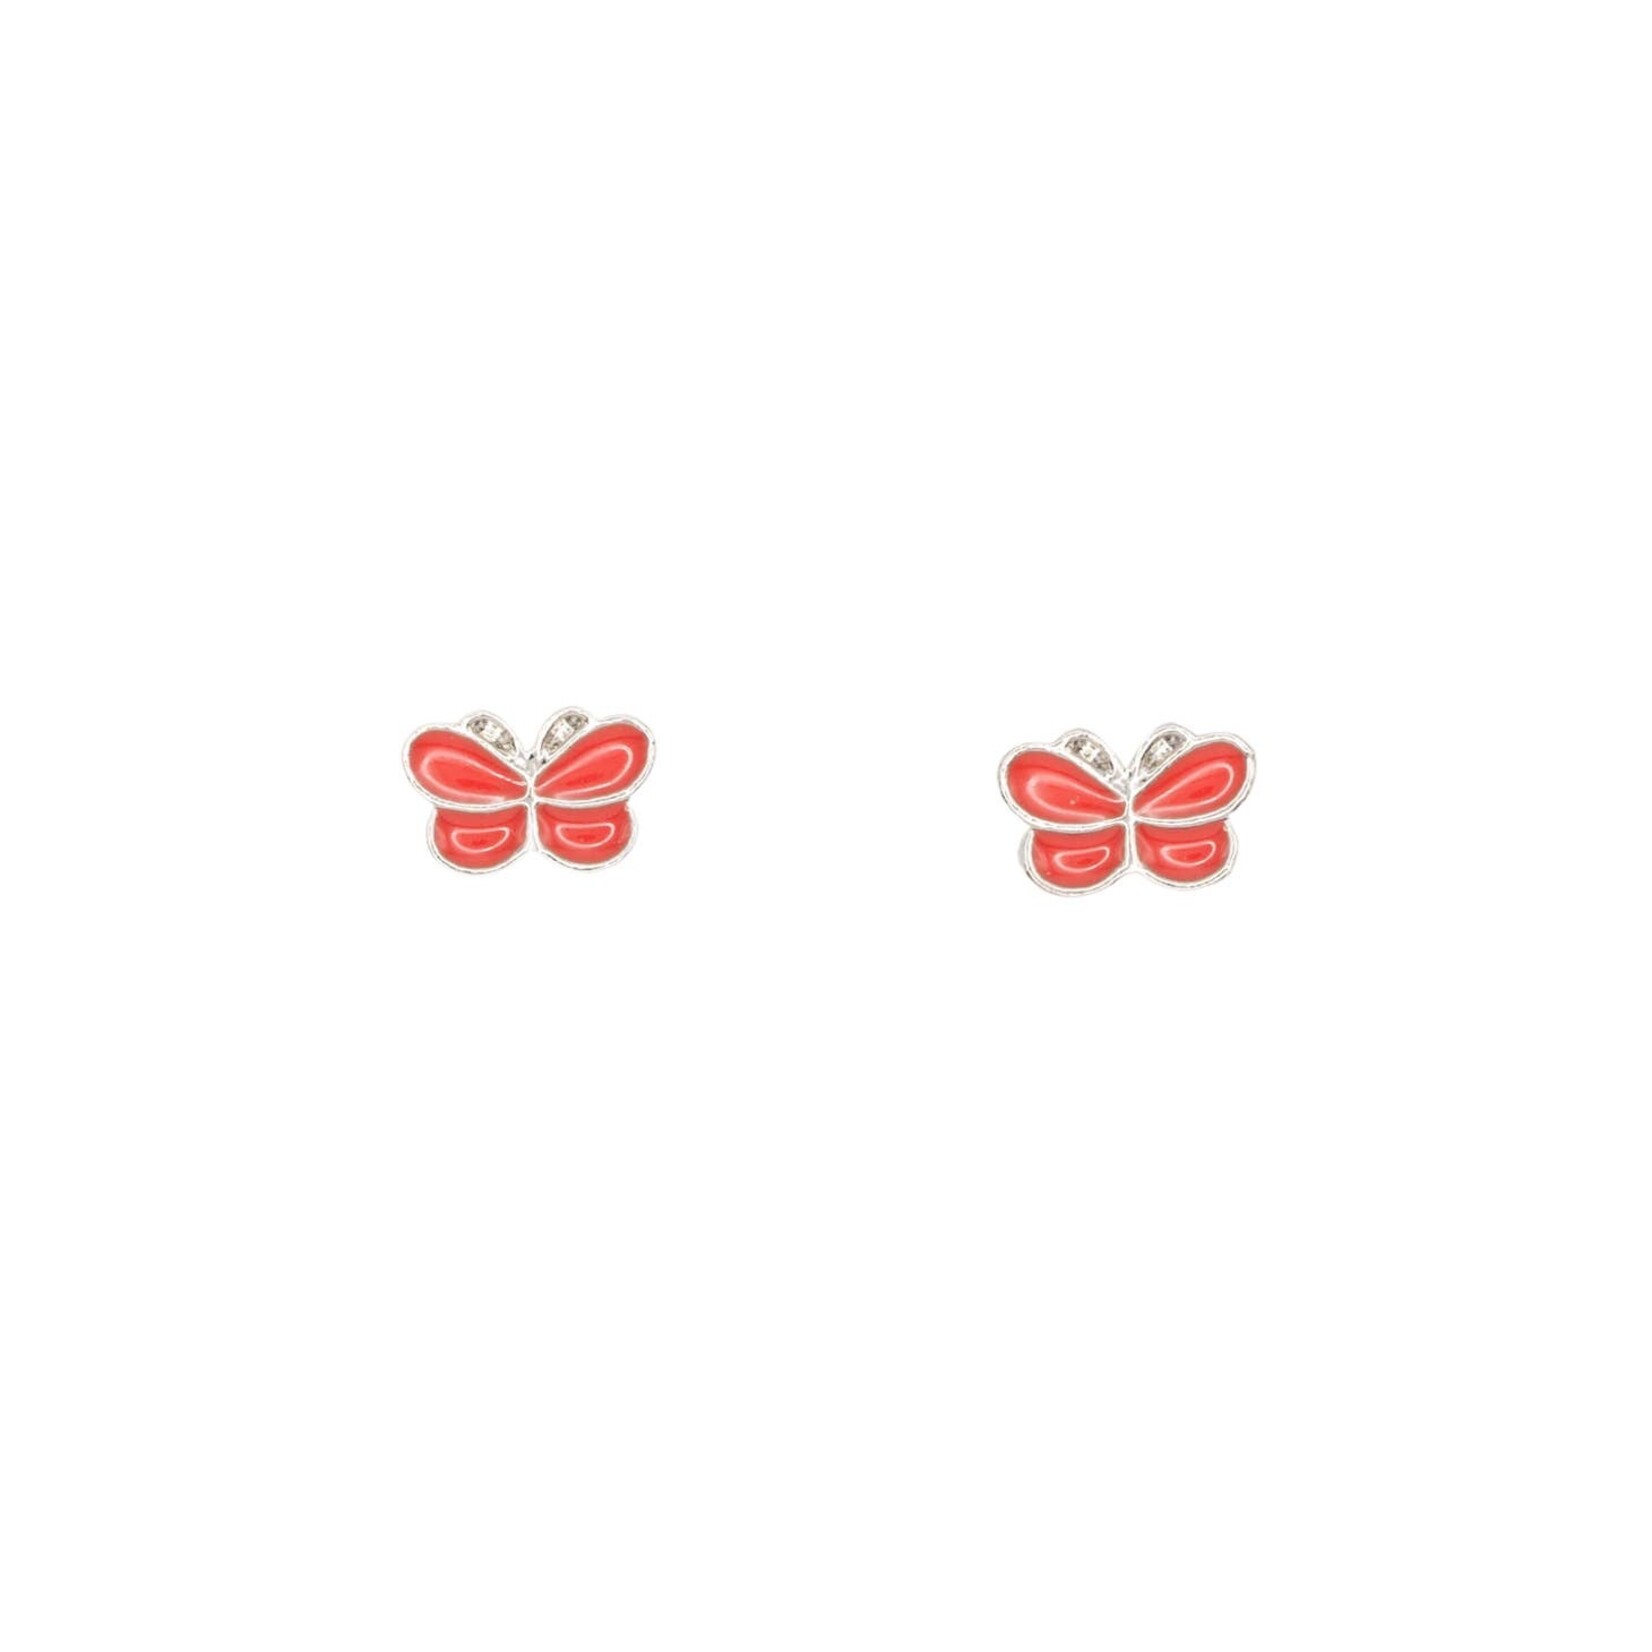 Rebecca Accessories Rebecca Accessories - Earrings - Pink Butterfly